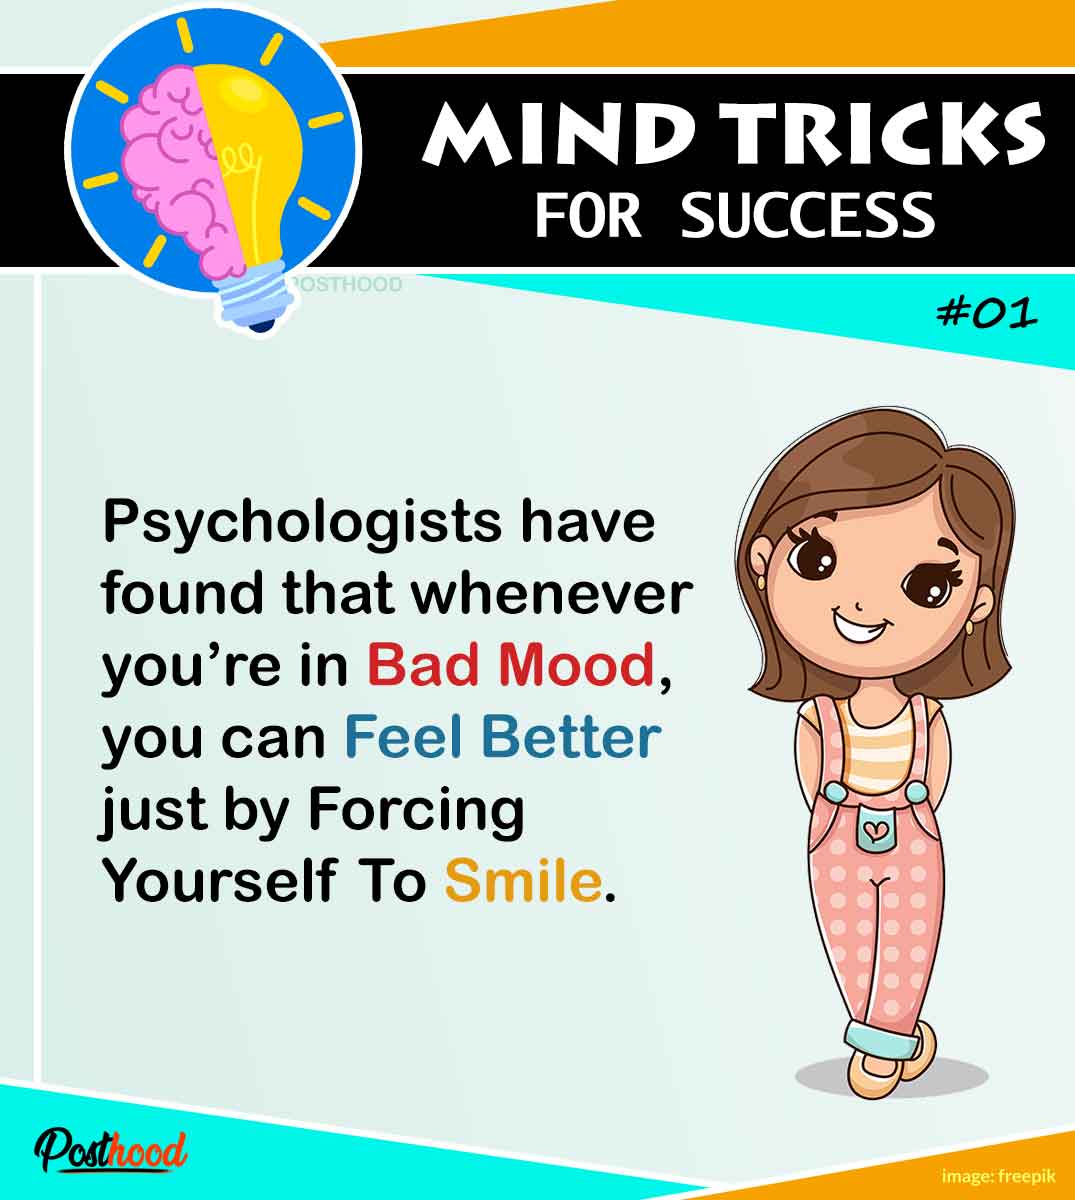 Explore some of the interesting mind tricks that can help you become successful and achieve your desired goals fast.